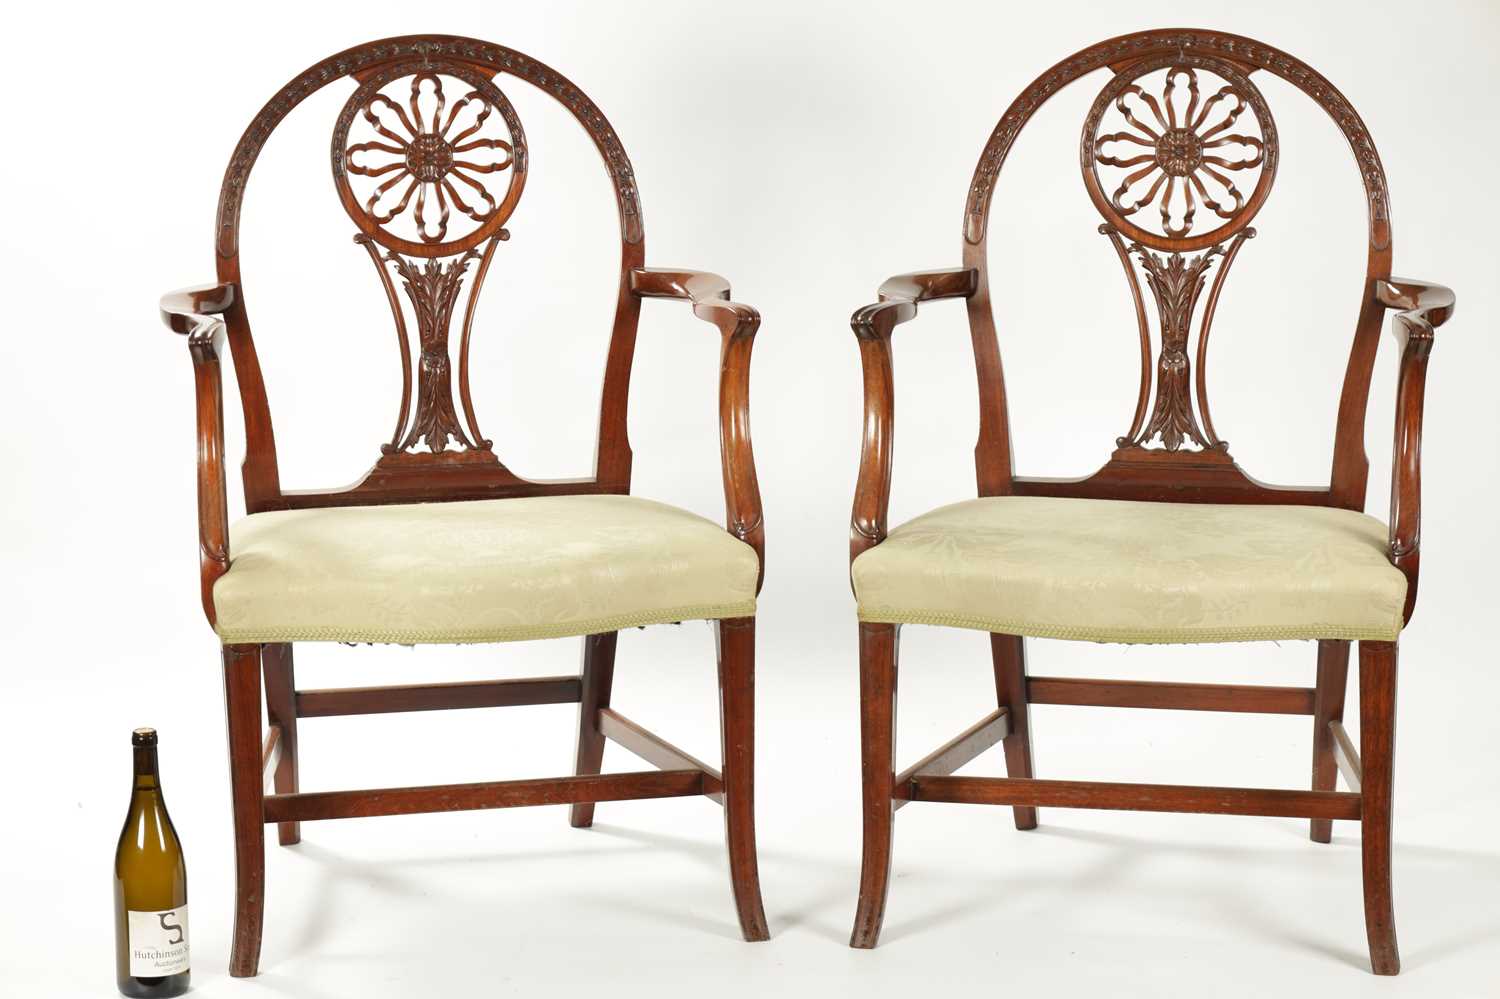 A PAIR OF 19TH CENTURY HEPPLEWHITE STYLE MAHOGANY ARMCHAIRS - Image 2 of 12